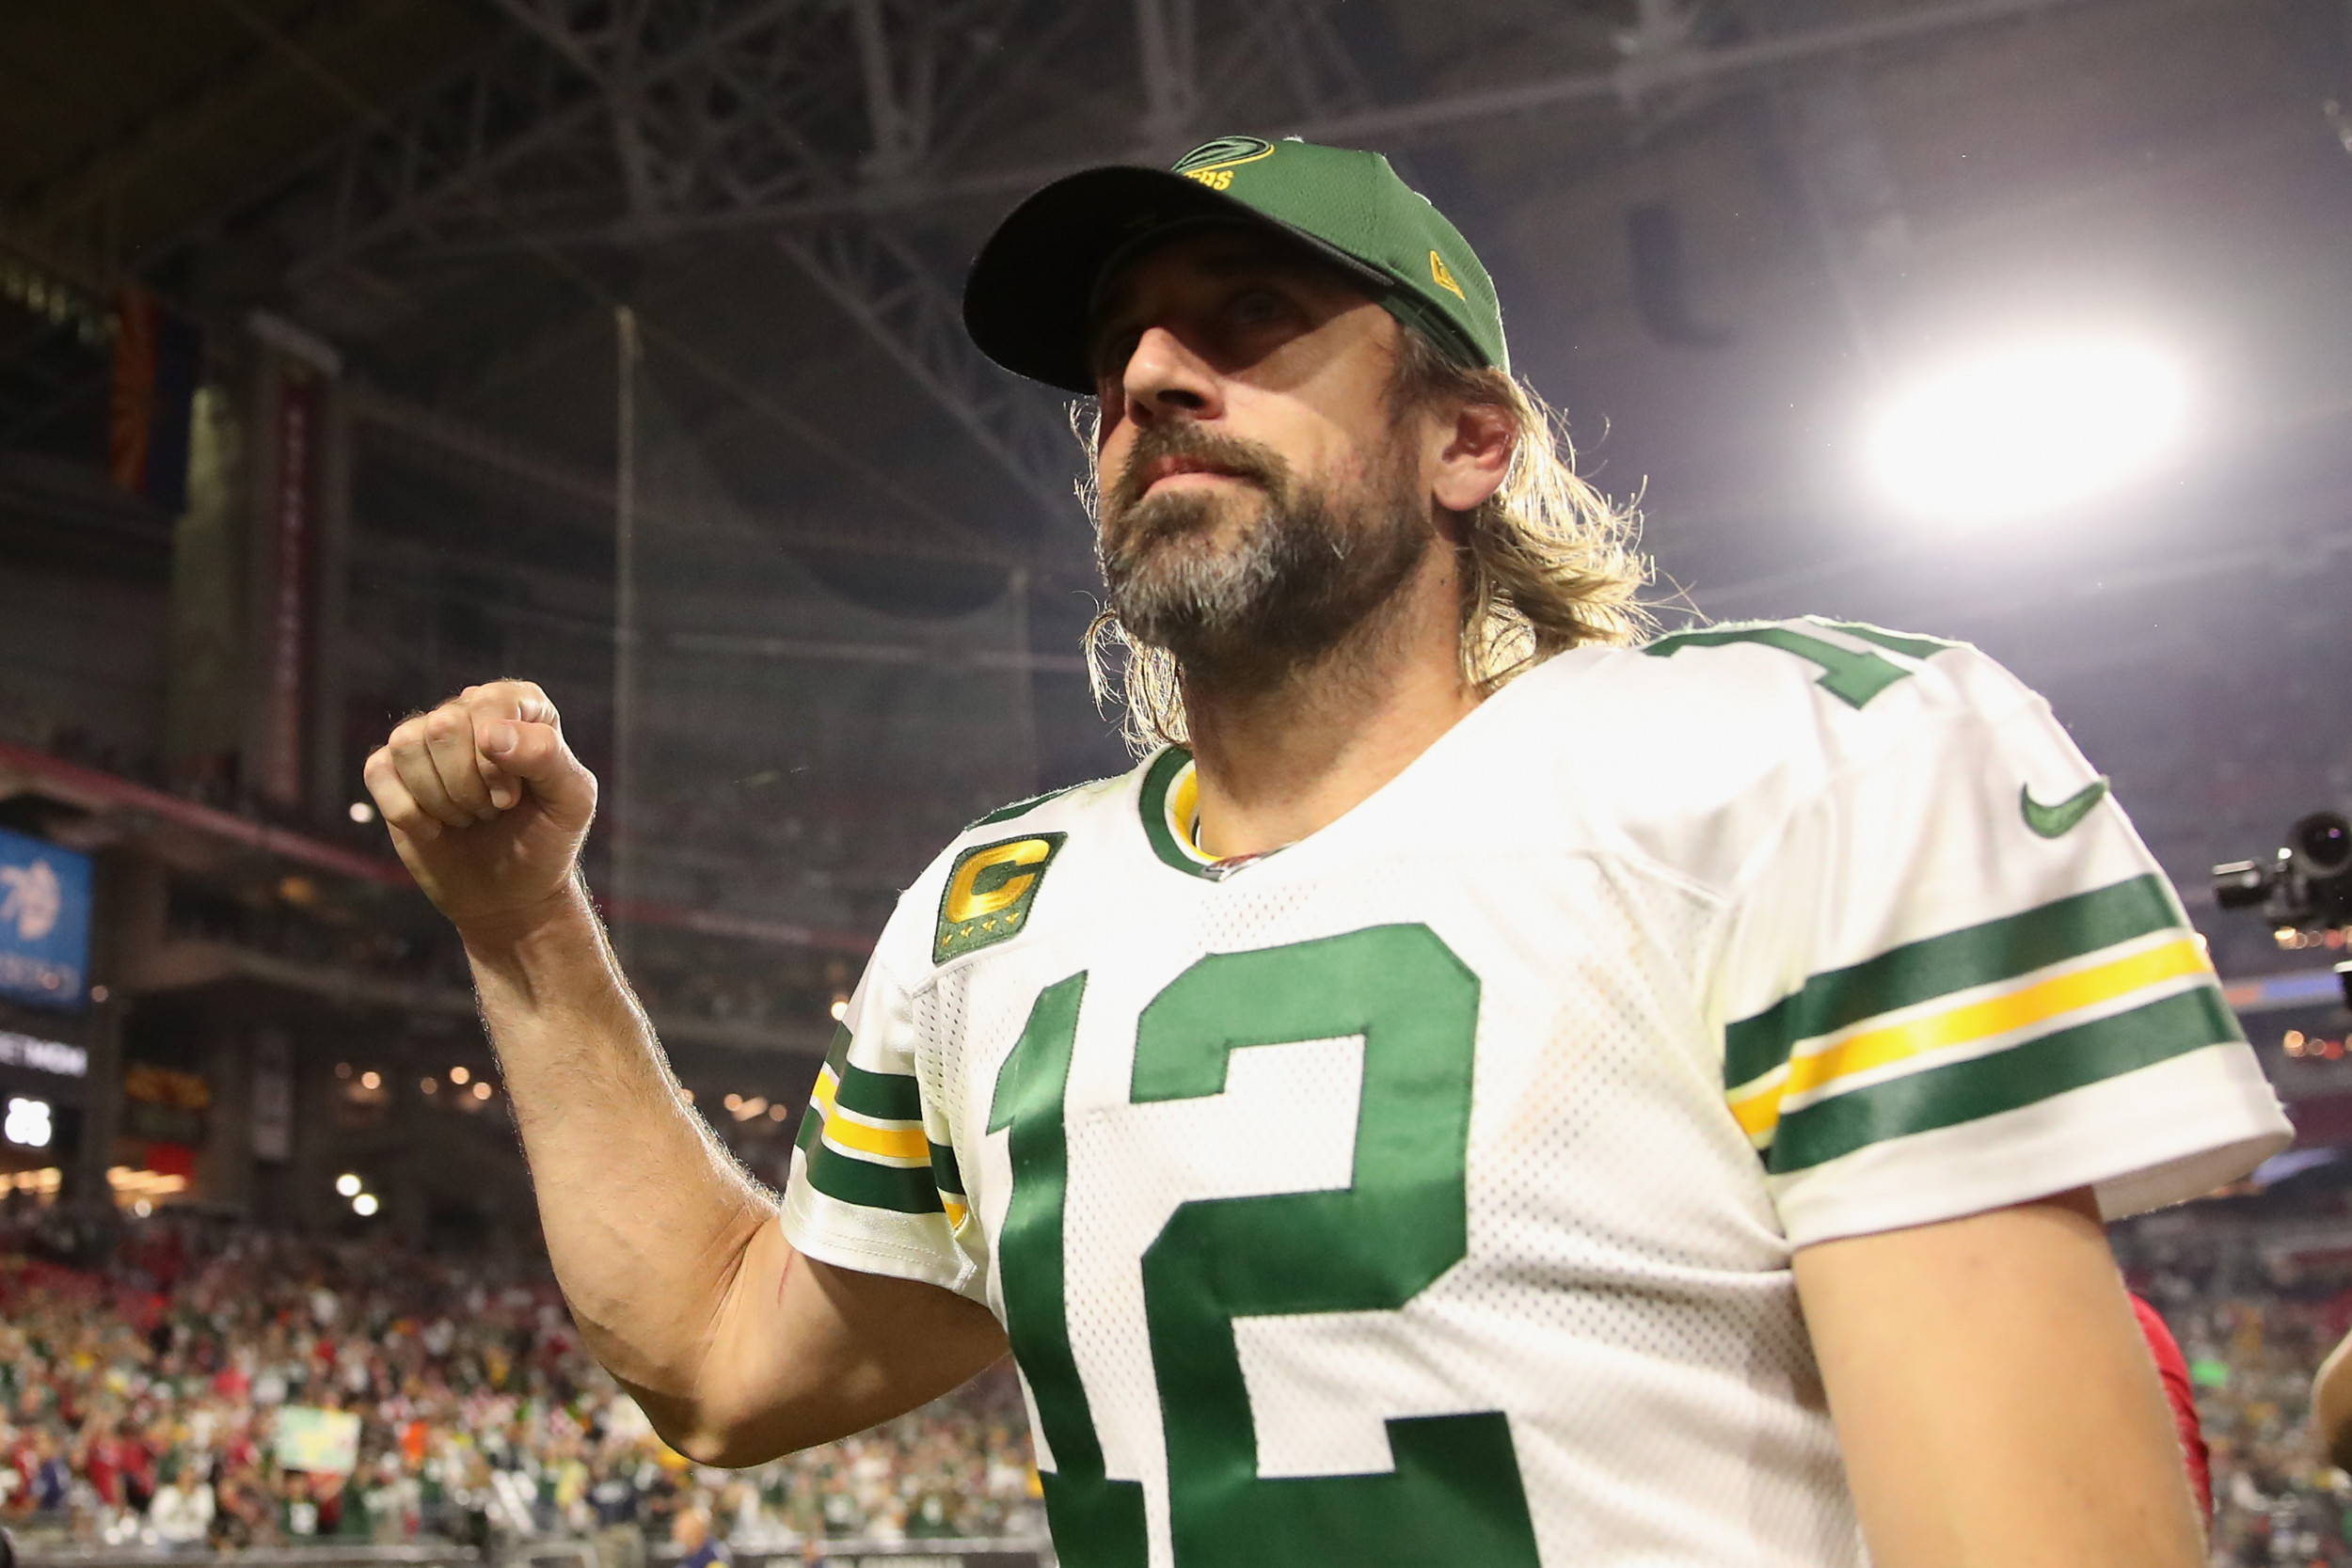 Hard Knocks' Clip Shows Aaron Rodgers' Reaction to Randall Cobb's Penalty